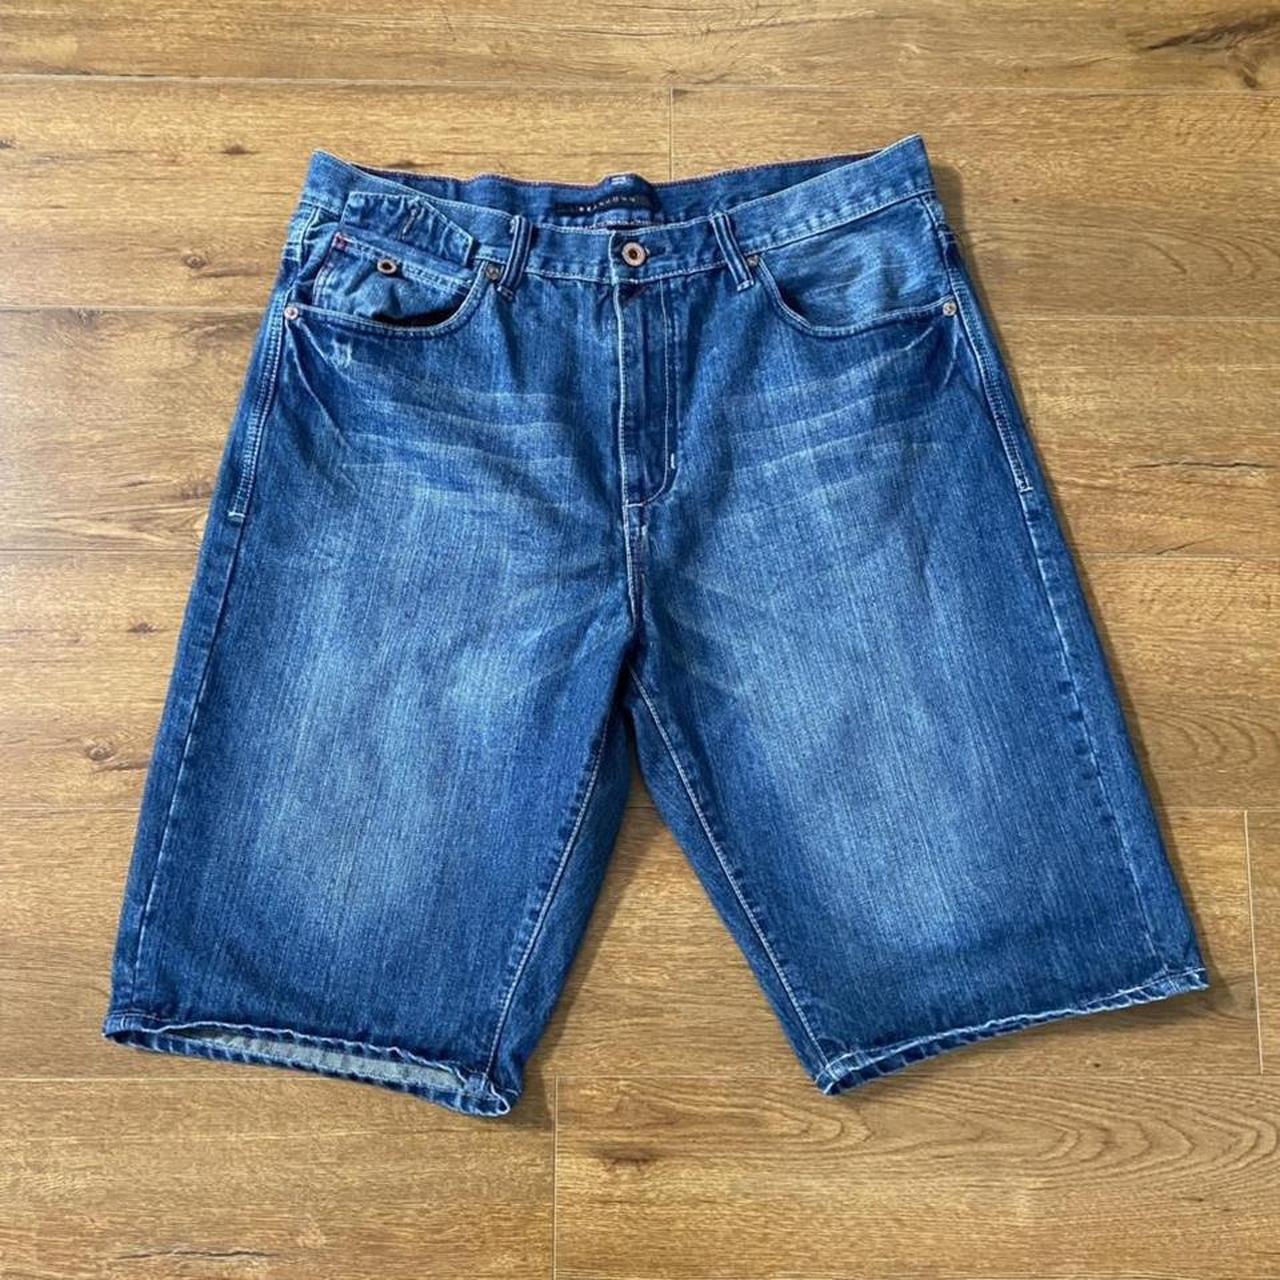 Men's Blue and Navy Shorts (4)